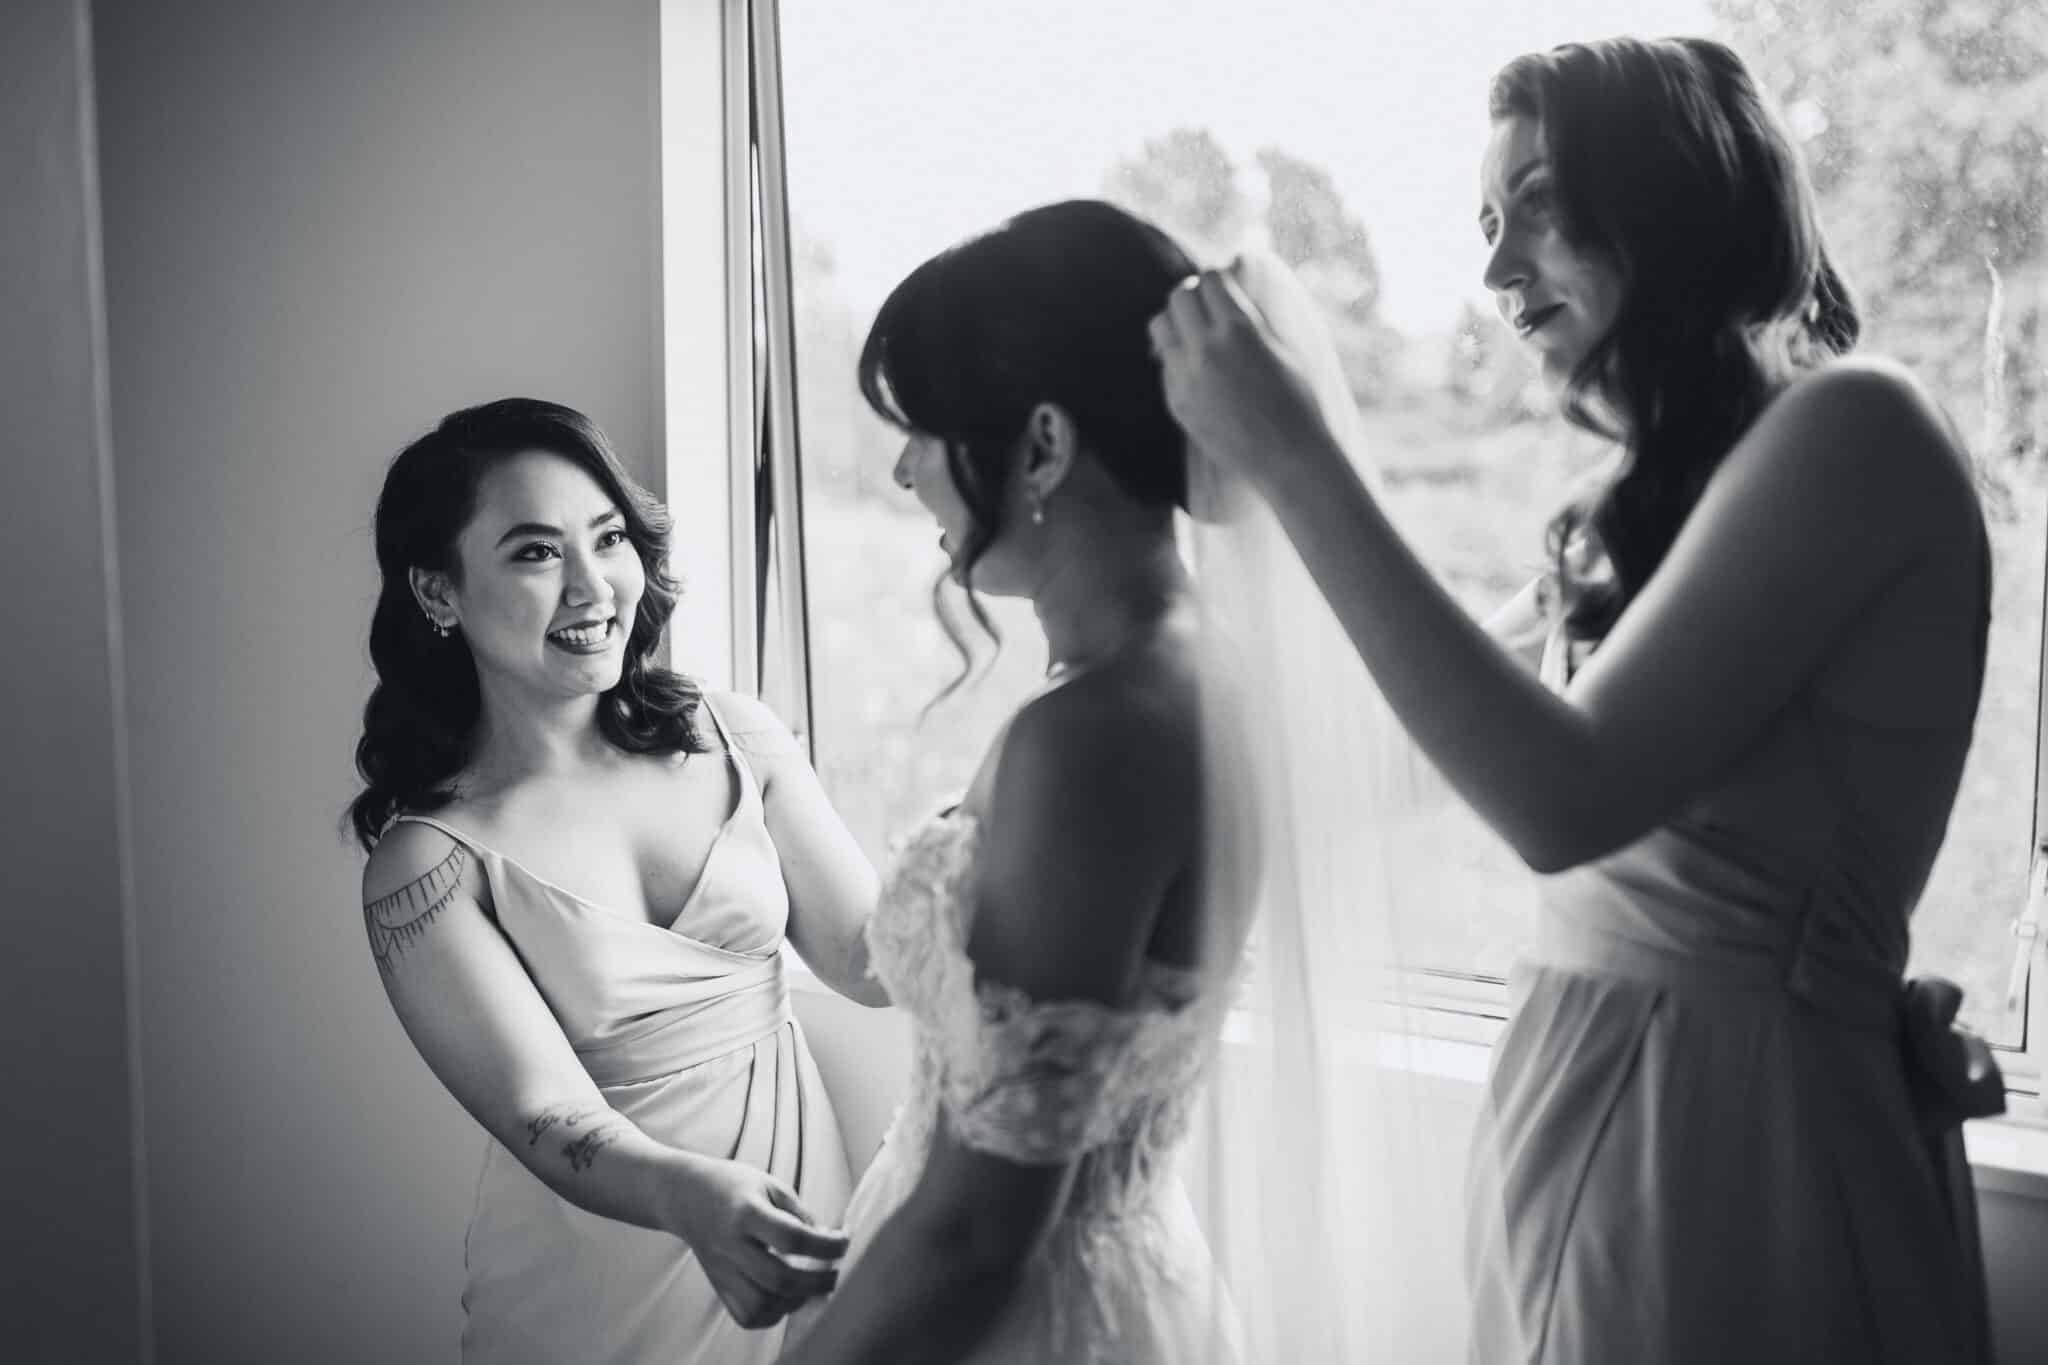 bride and bridesmaids getting ready